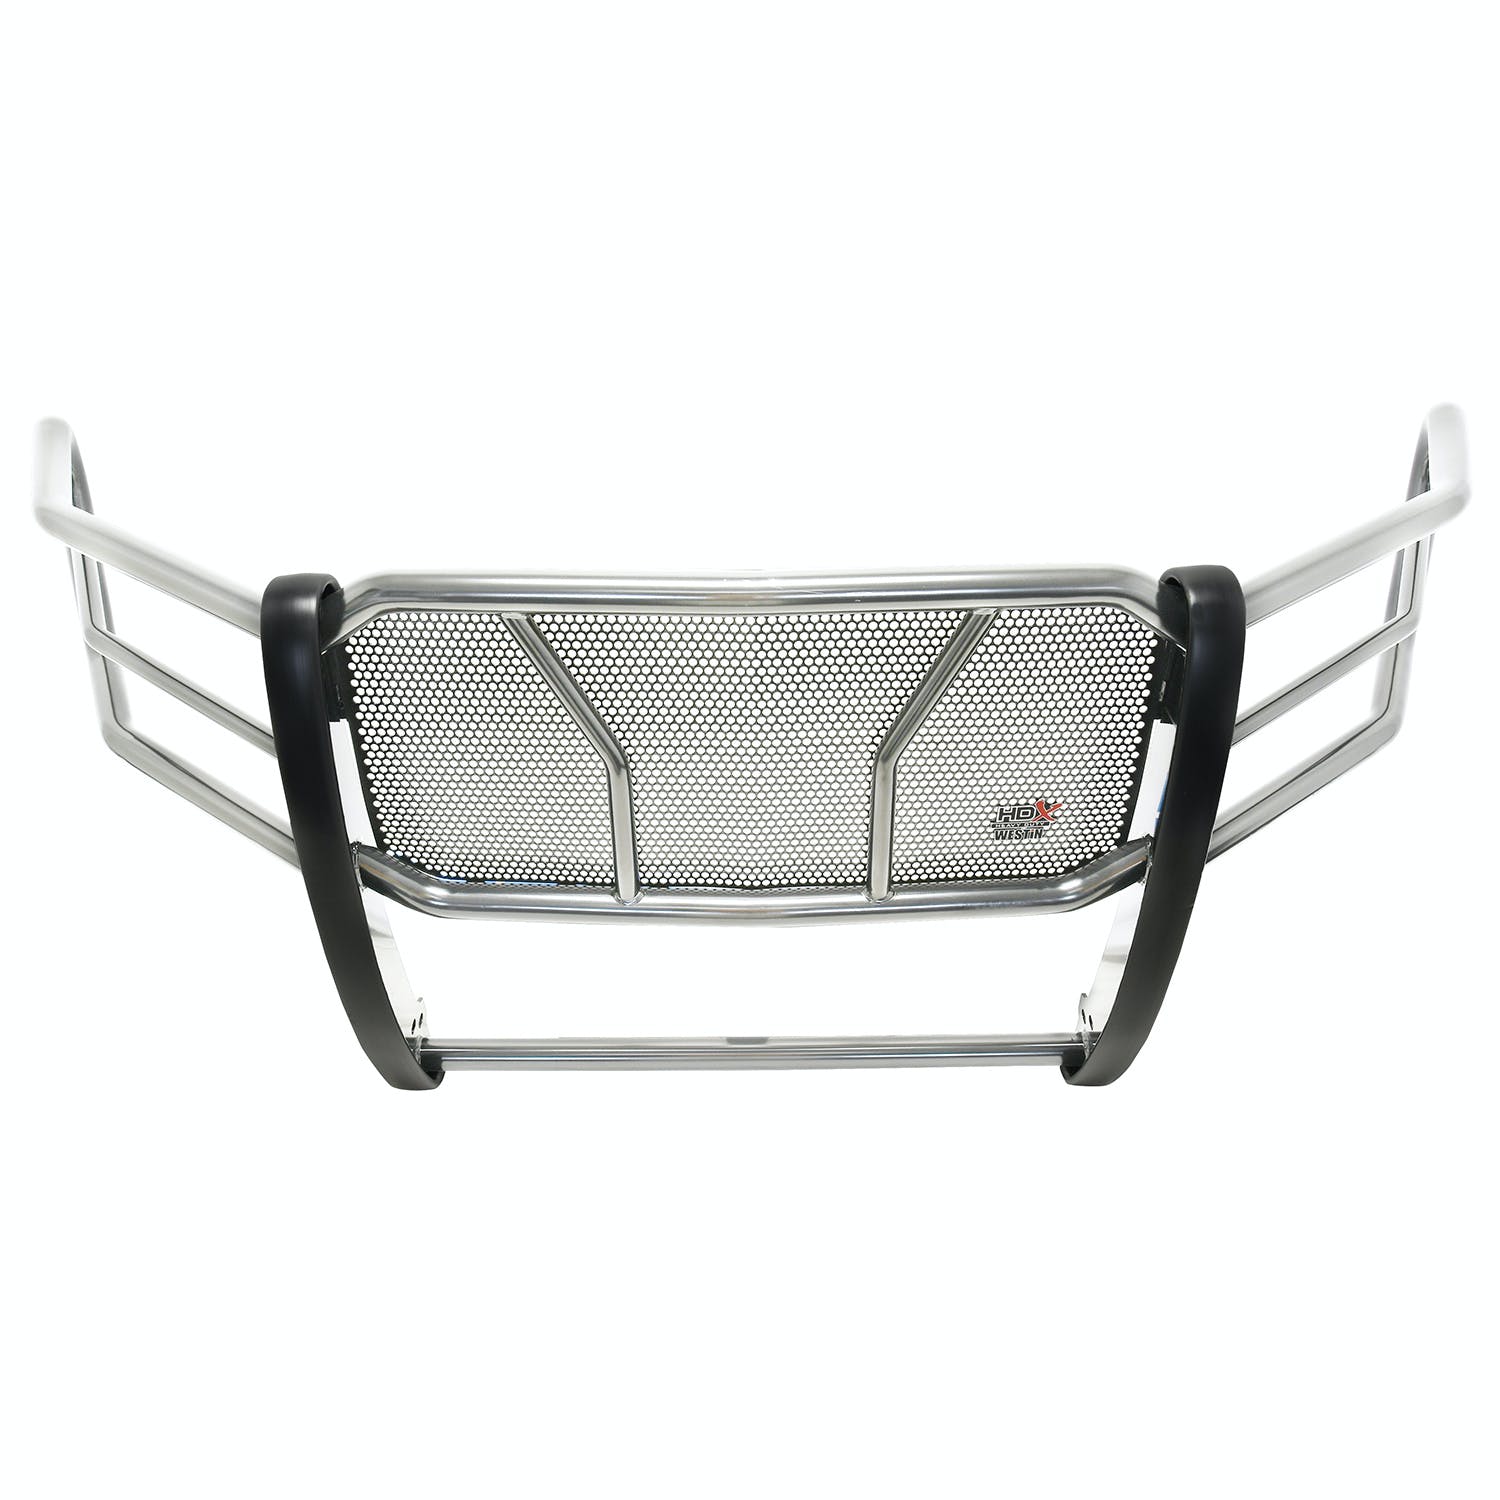 Westin Automotive 57-4060 HDX Grille Guard Stainless Steel